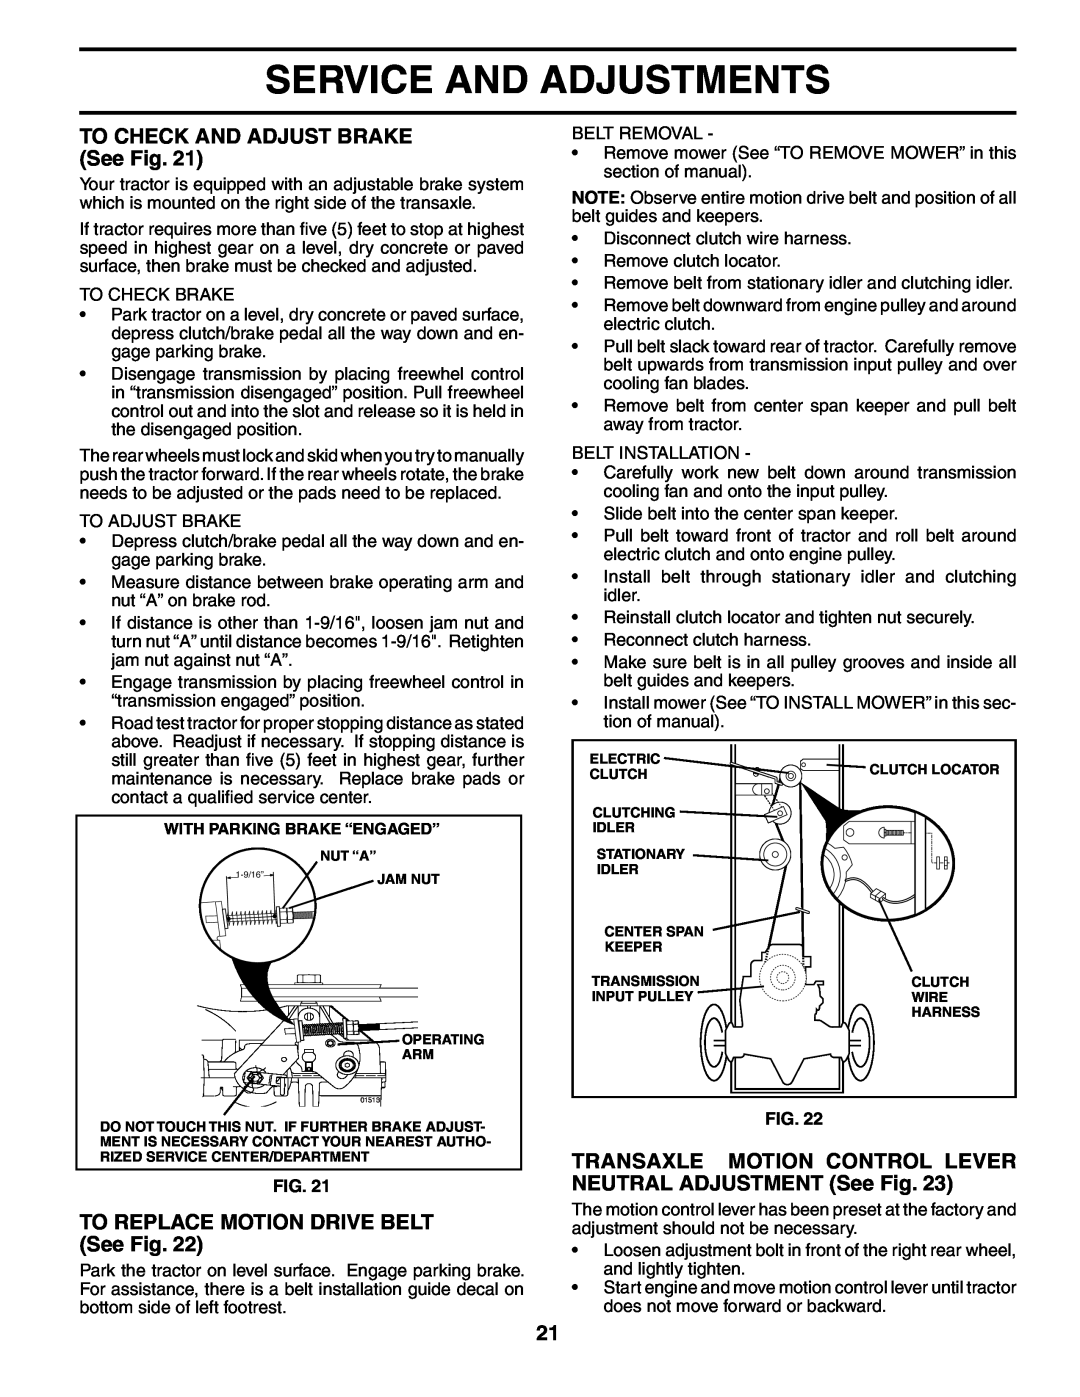 Poulan 195018 manual TO CHECK AND ADJUST BRAKE See Fig, TO REPLACE MOTION DRIVE BELT See Fig, Service And Adjustments 